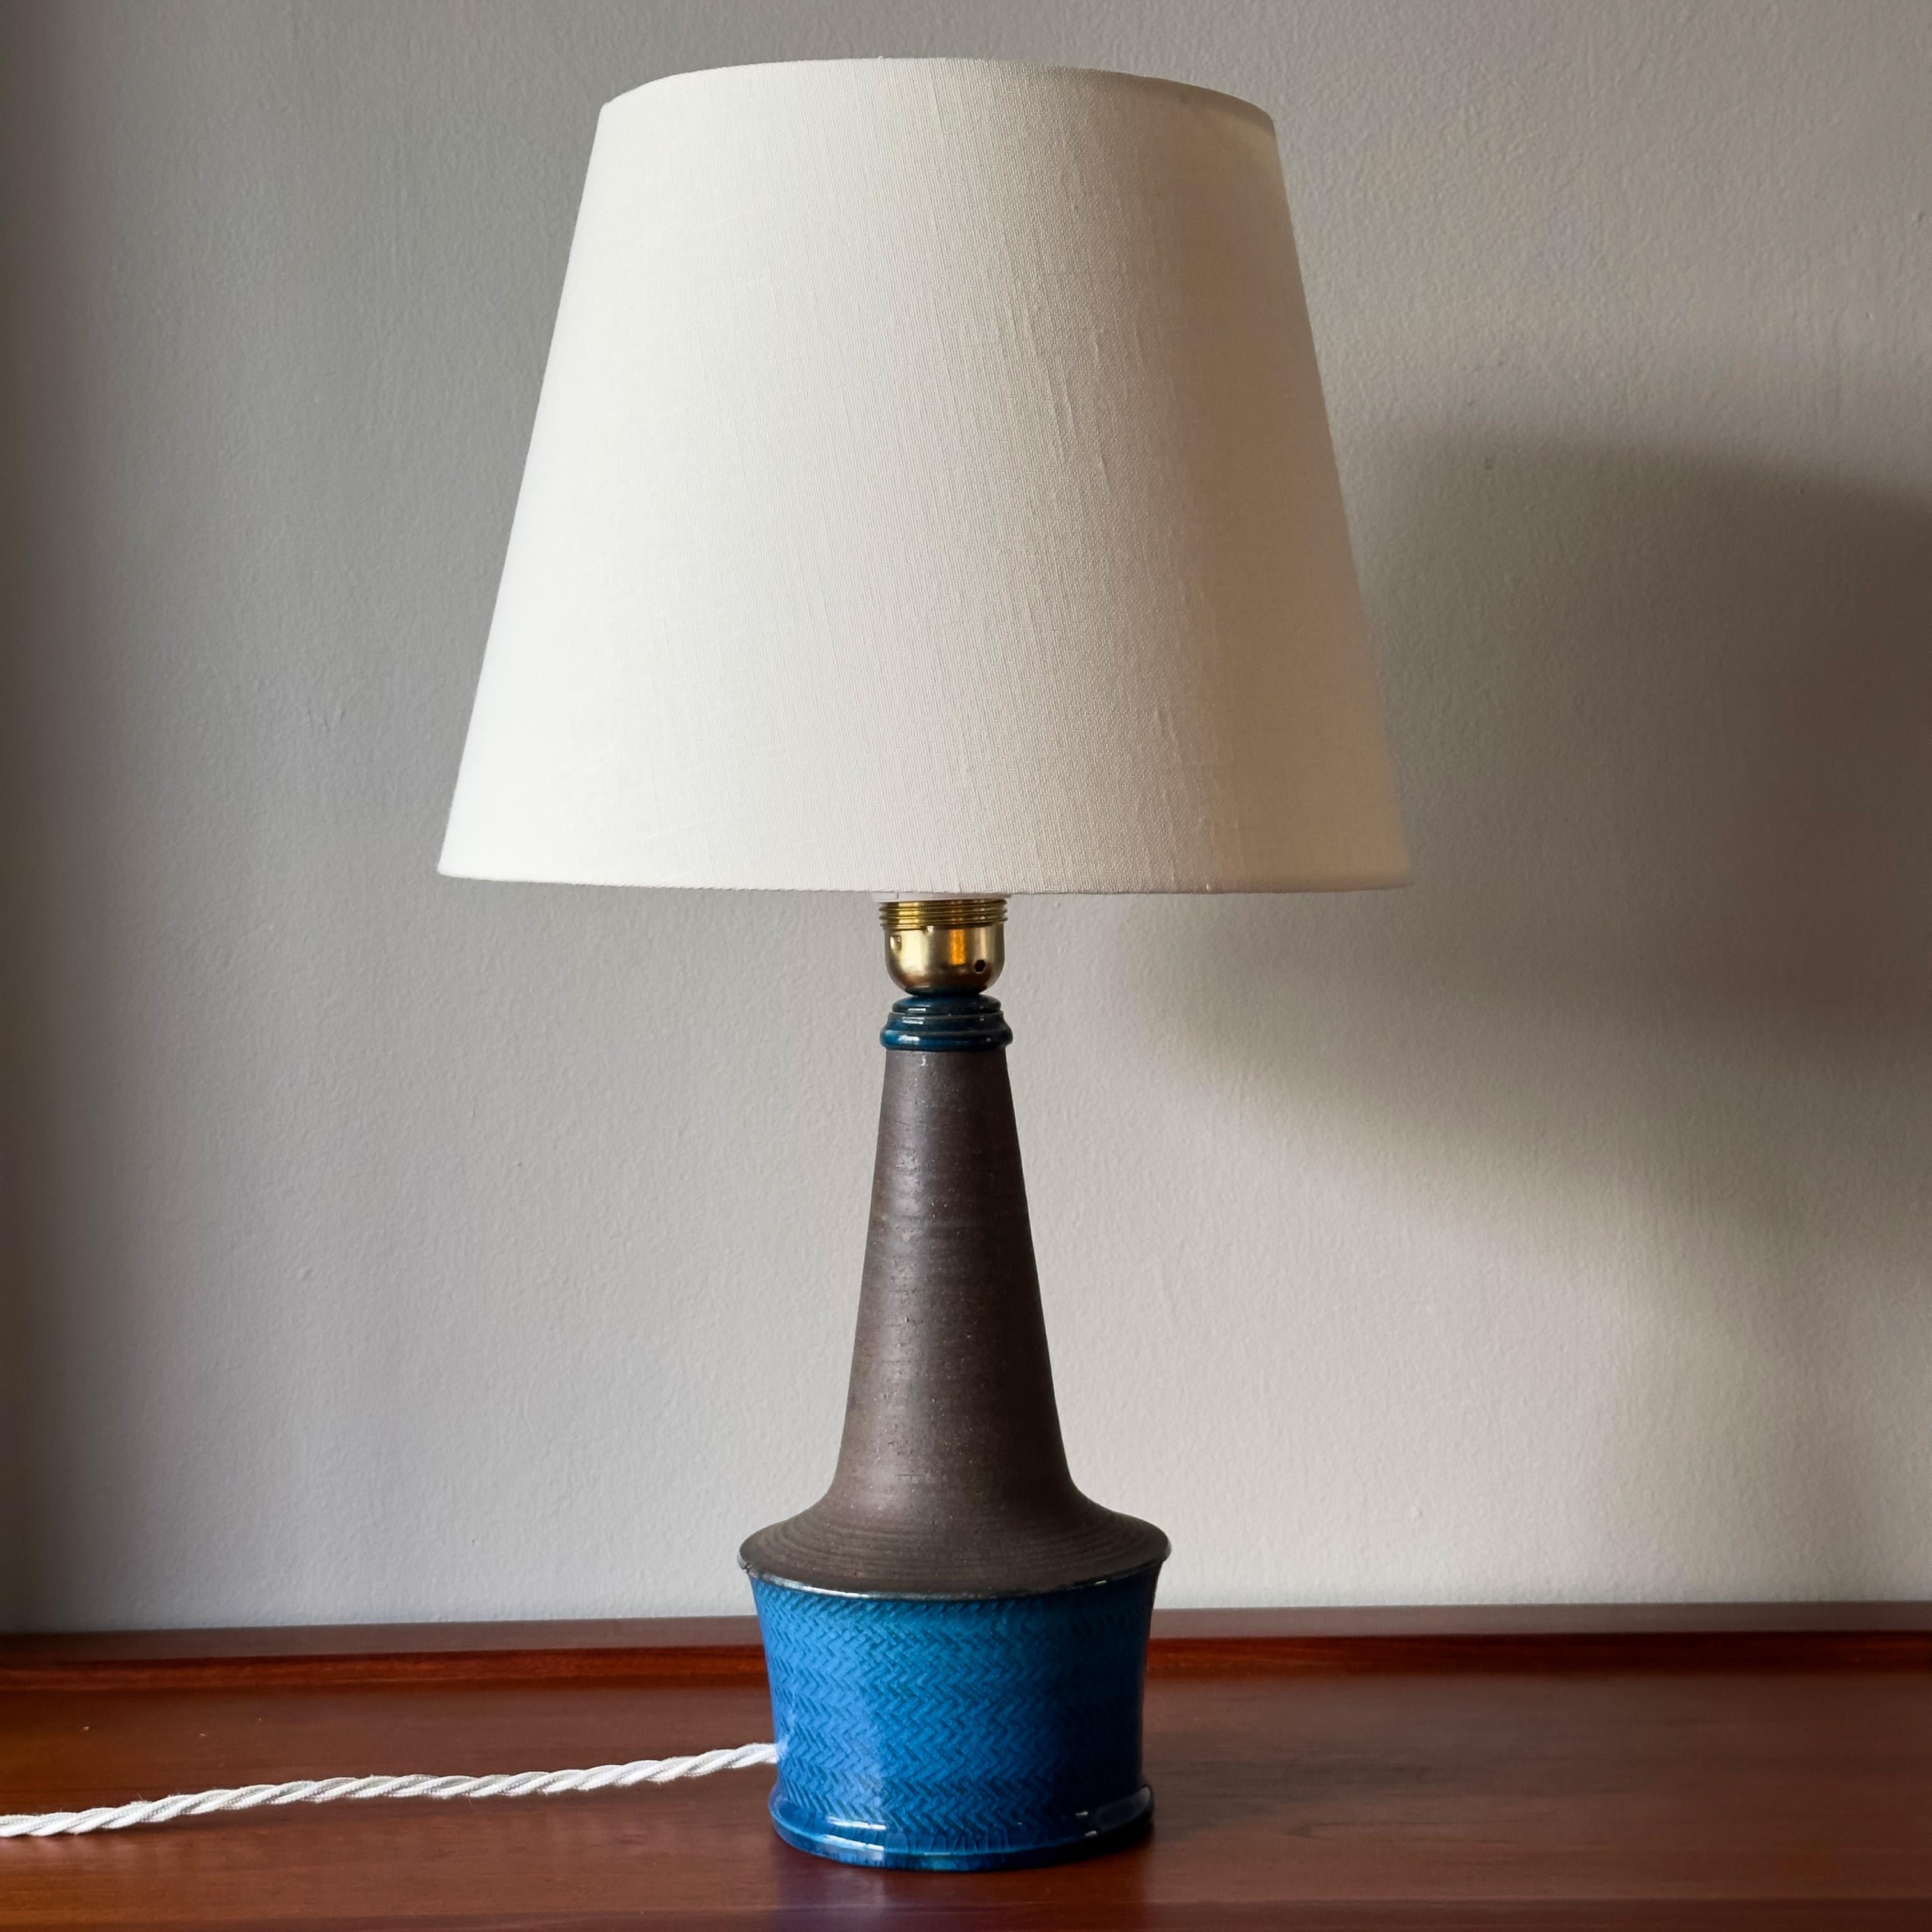 20th Century Stoneware Table Lamp #2 Nils Kähler For Sale